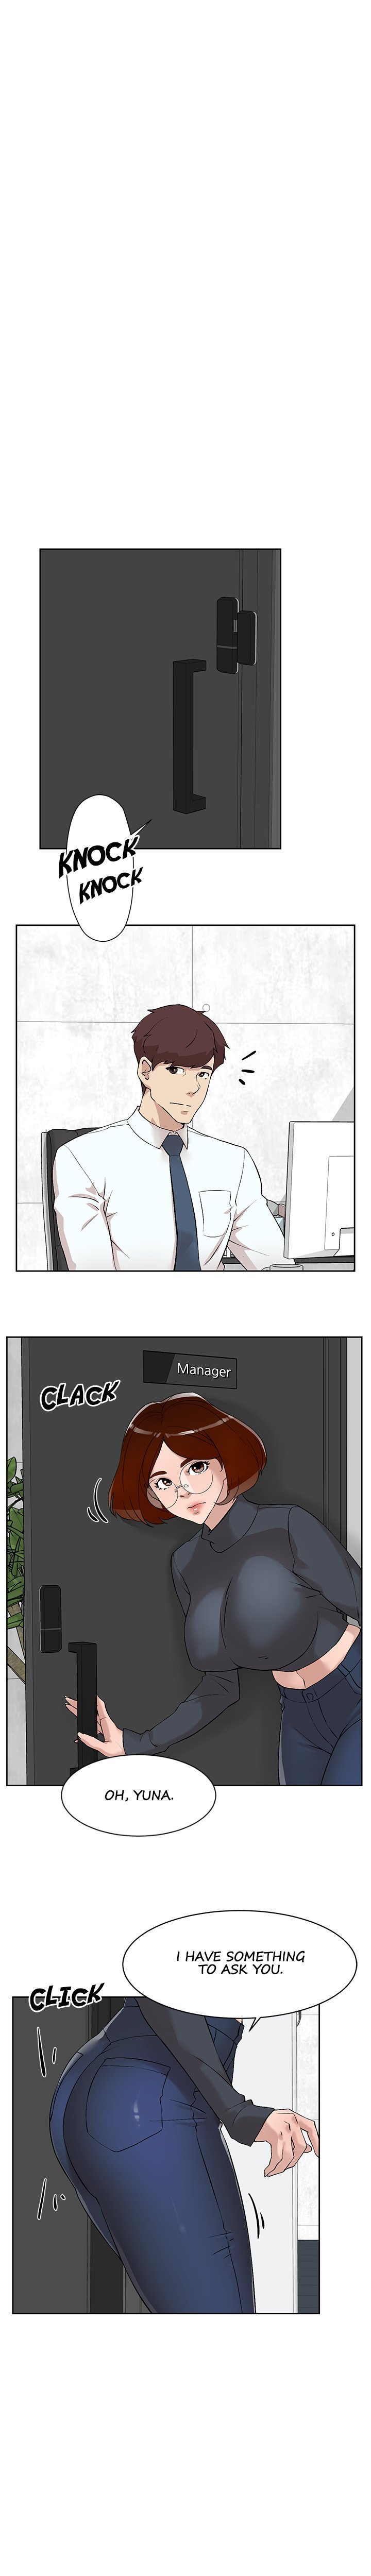 office-affairs-chap-123-3